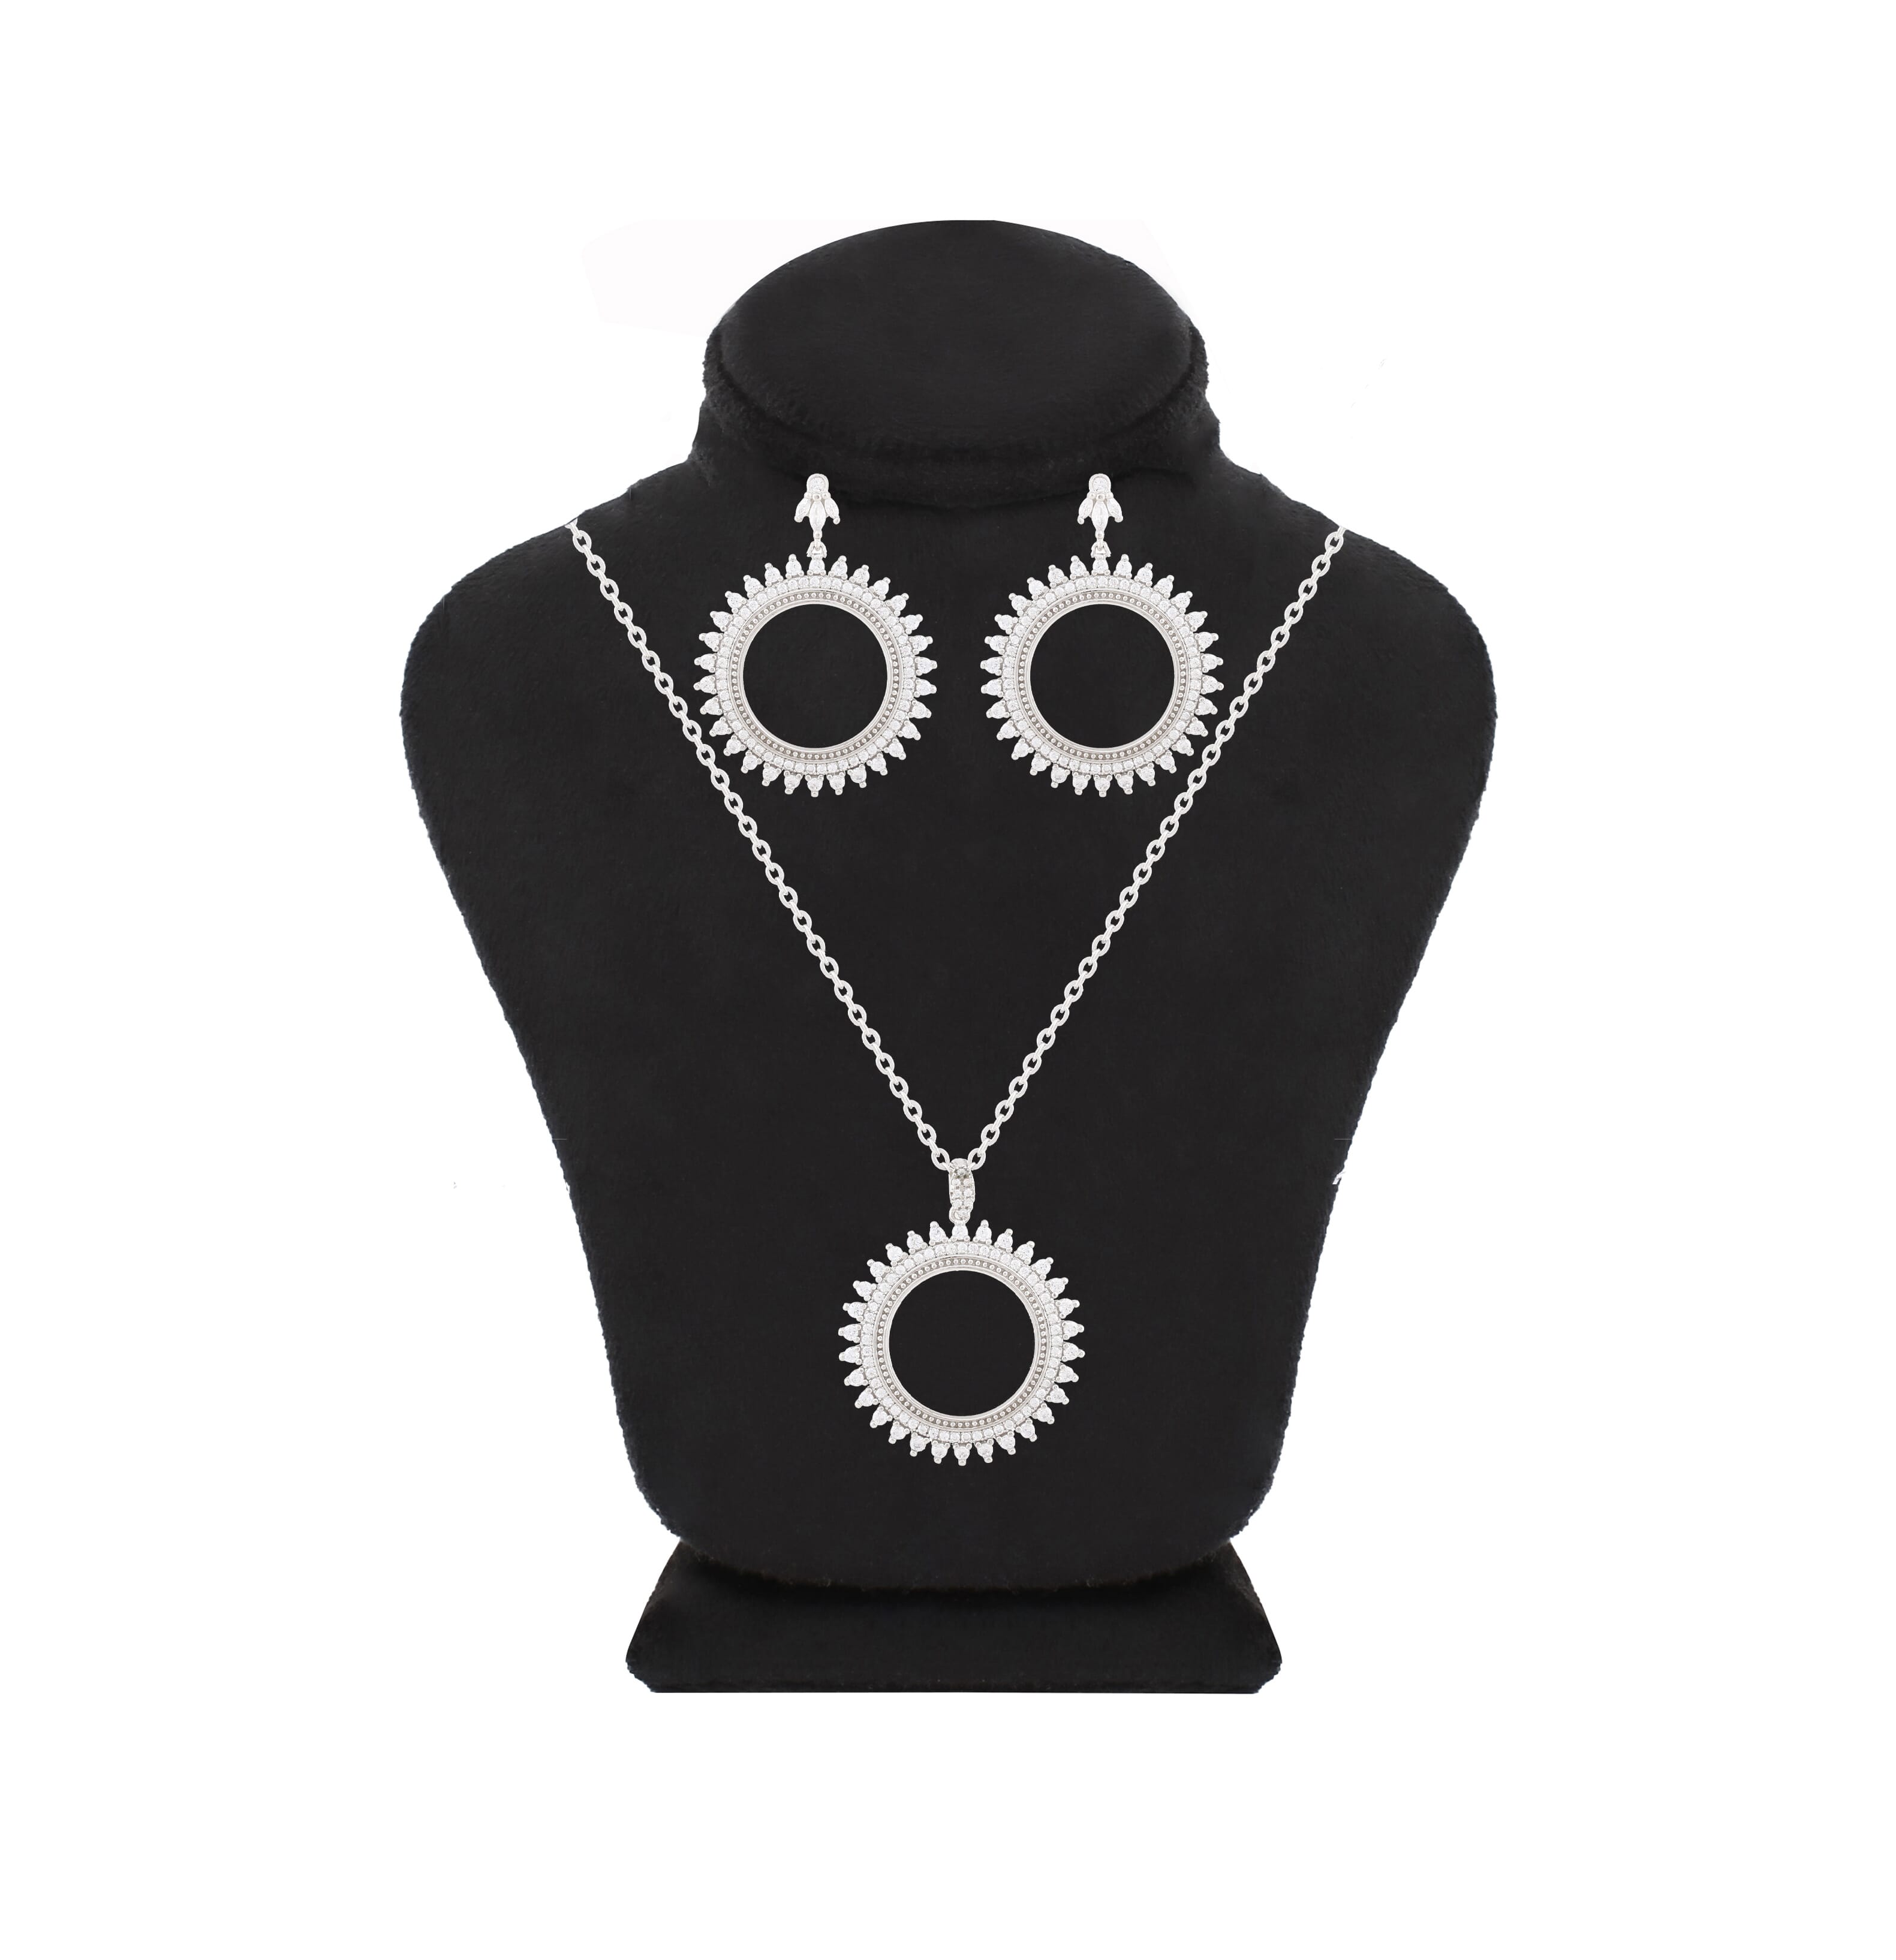 Asfour Crystal 925 Sterling Silver Necklace & Earrings With Hollow Round Design Inlaid With Zircon Stones SR0106-W